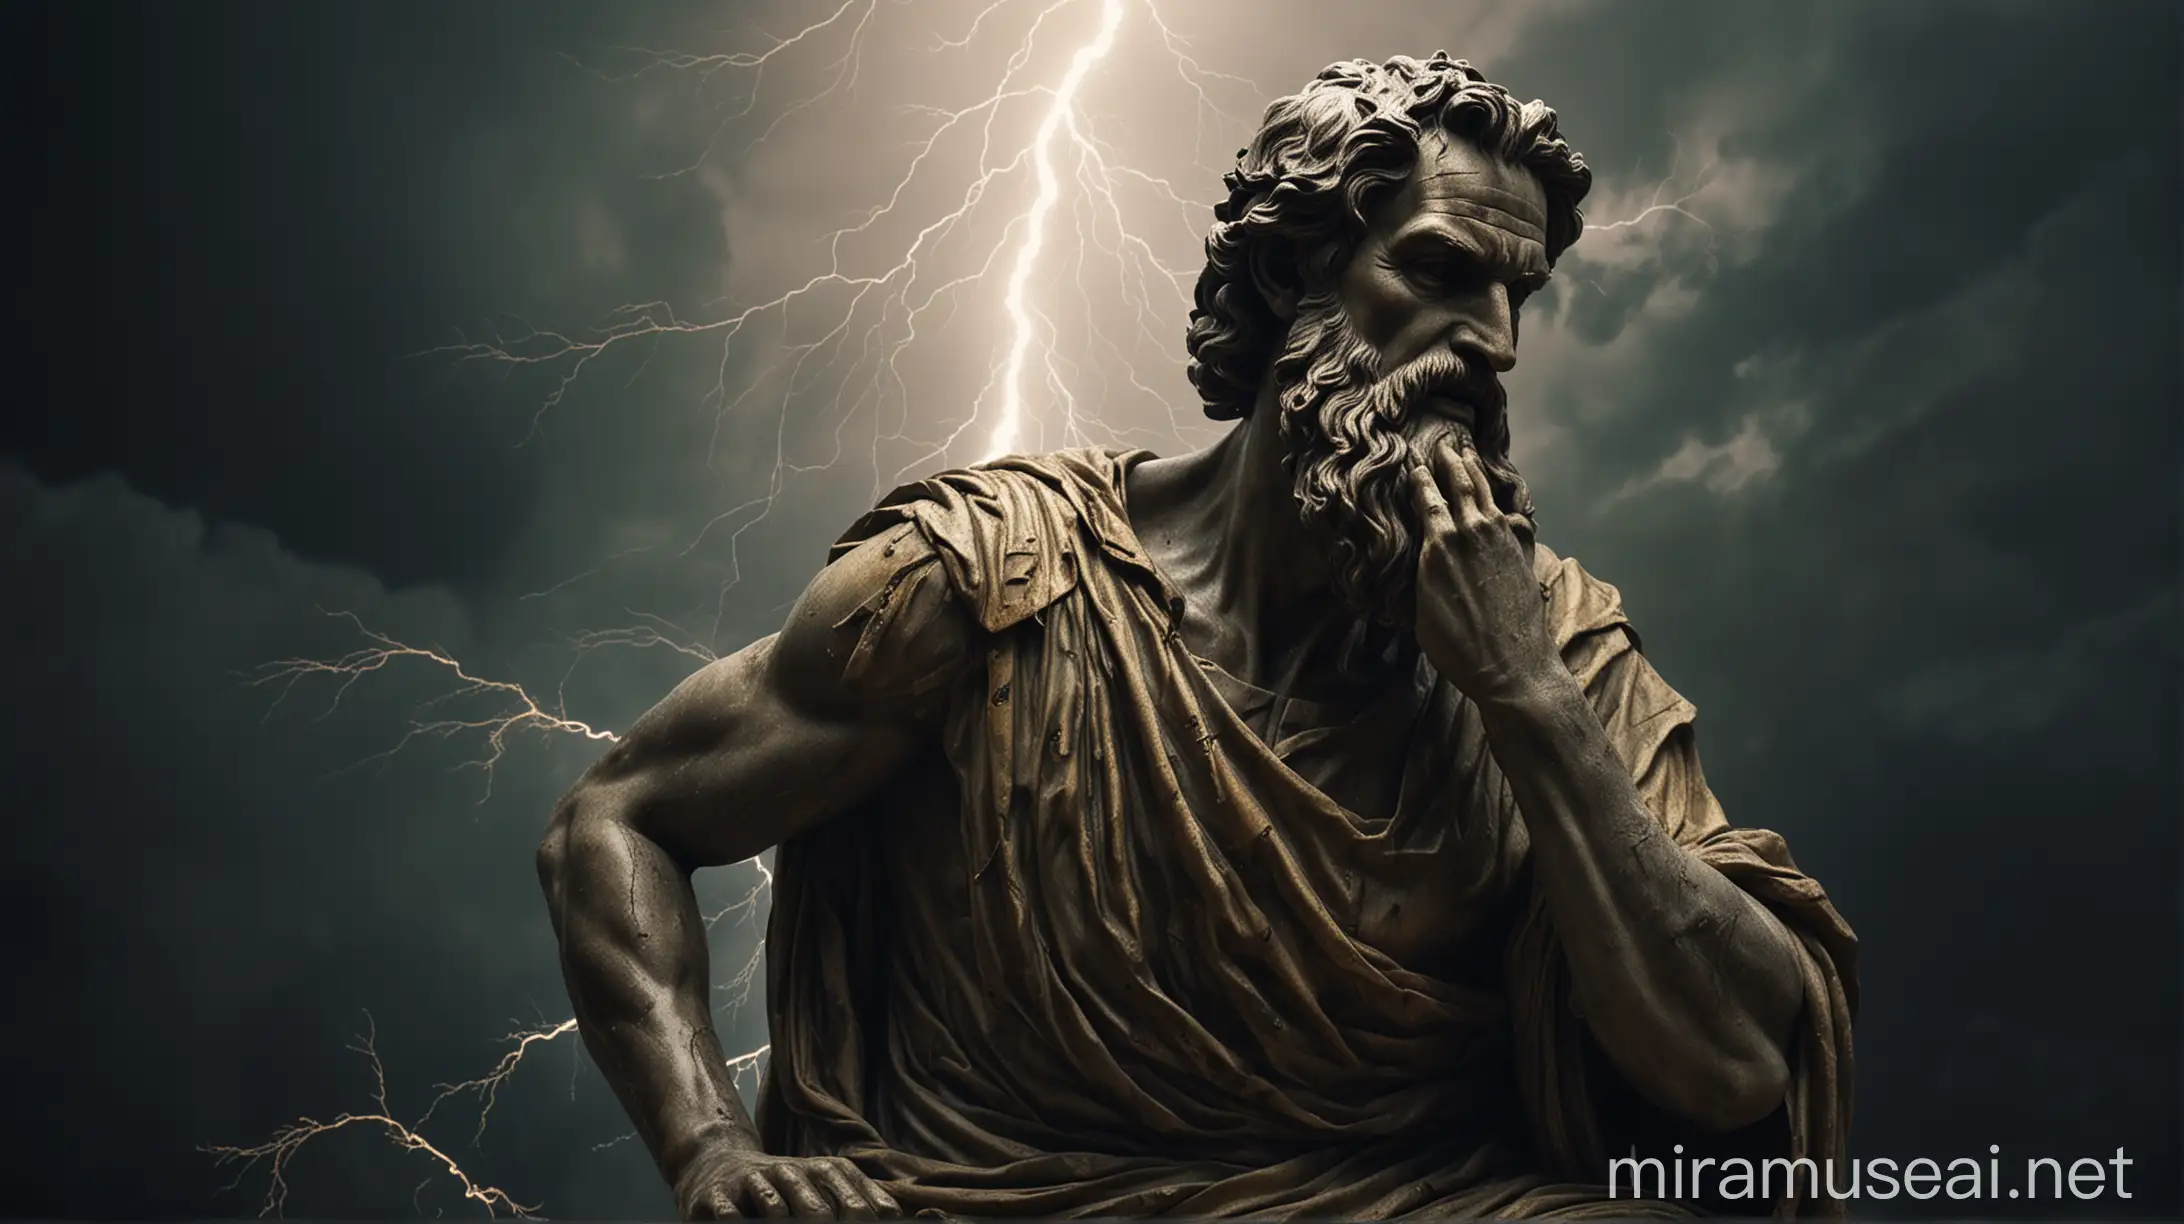 An ancient Greek statue of Epictetus, poised and pensive, with a dramatic scene of lightning branching across the backdrop, a ghastly display of nature's ferociousness, punctuated by a stark contrast of black and gold, against a backdrop of hazy mystery, shadows running round the corners, ultra-detailed, film photography capturing the ephemeral nature of light, ethereal light leaks lending an ethereal